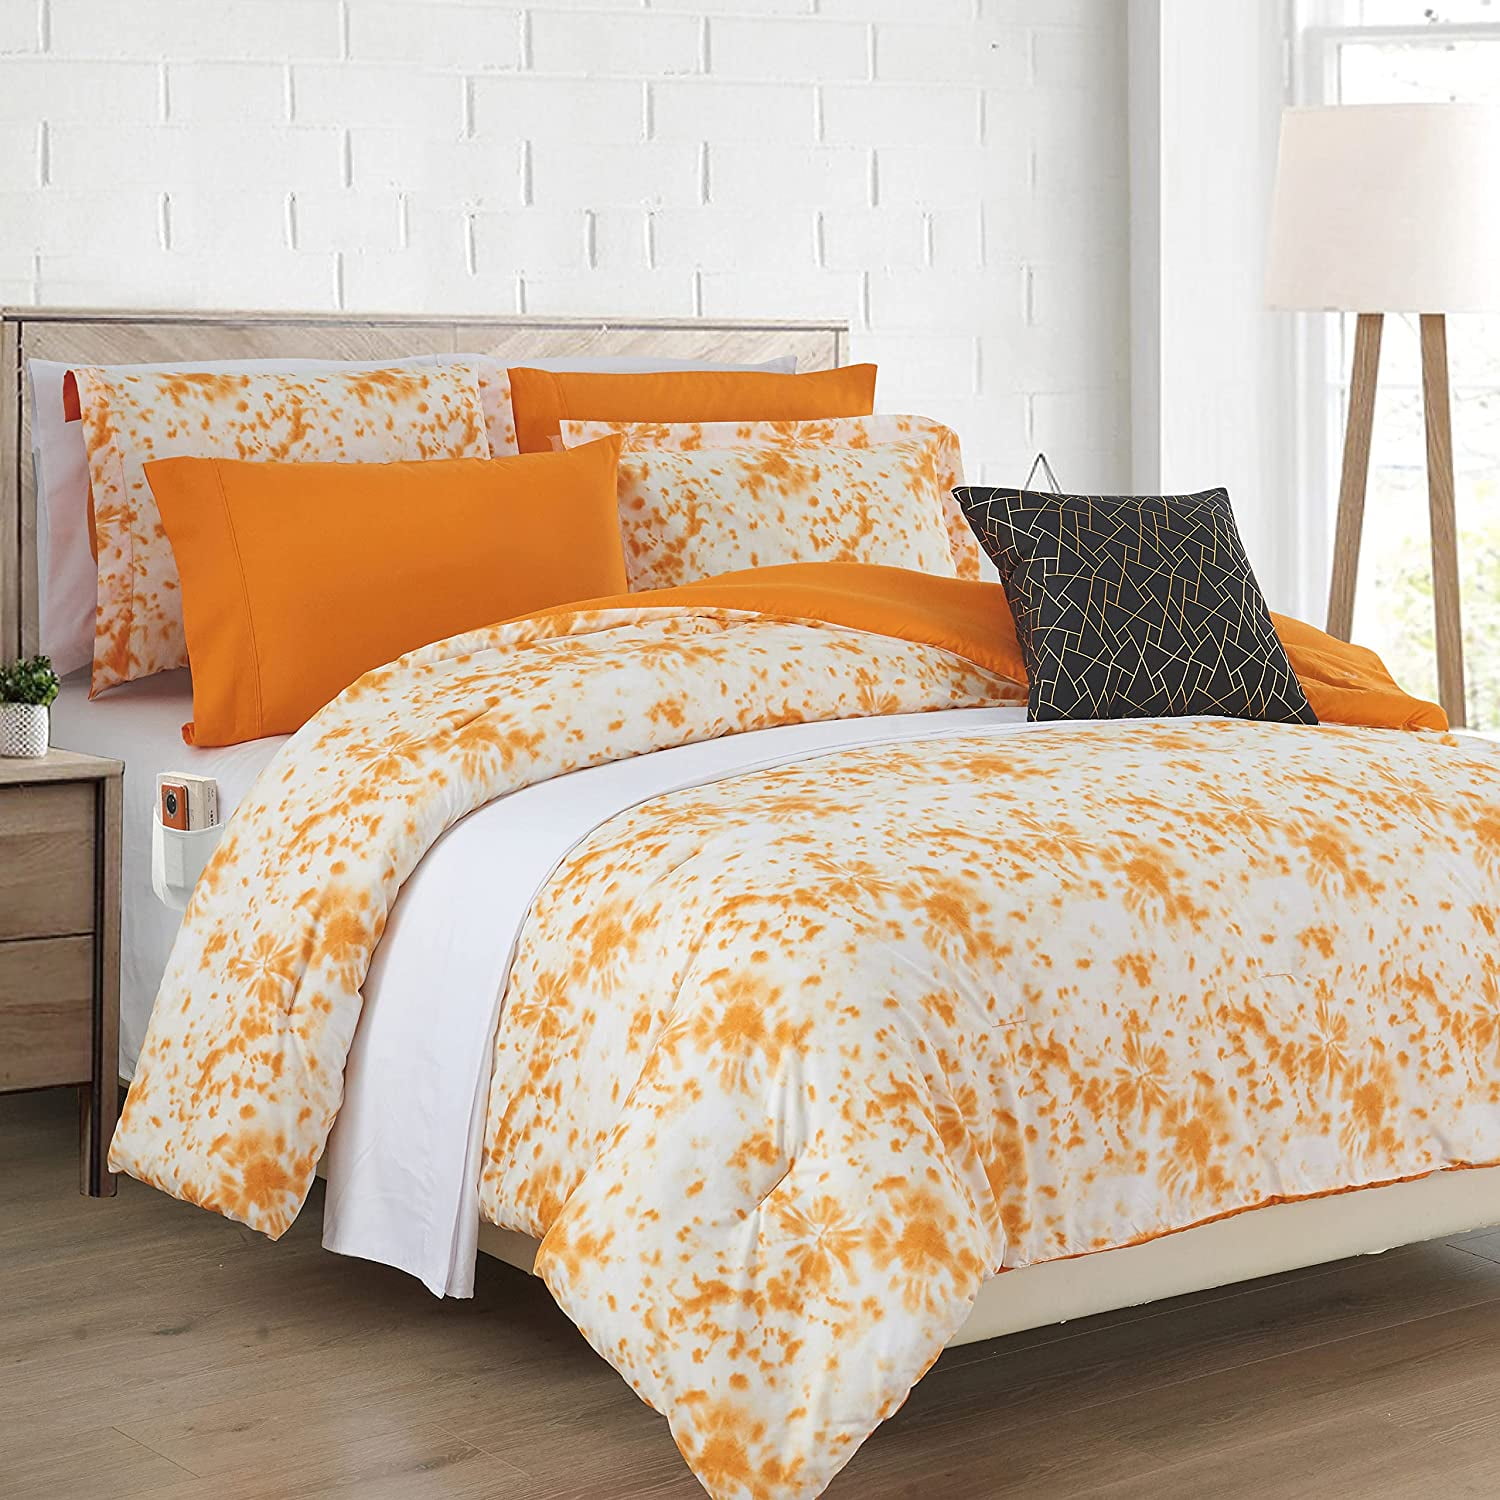 Elegant Comfort Reversible 10-Piece Comforter Set, Tie-Dye Print,  Decorative Pillow and Fitted Sheet with Smart Pockets, Soft, Plush,  Lightweight Material, 10pc Tie-Dye Set, Queen, Orange 